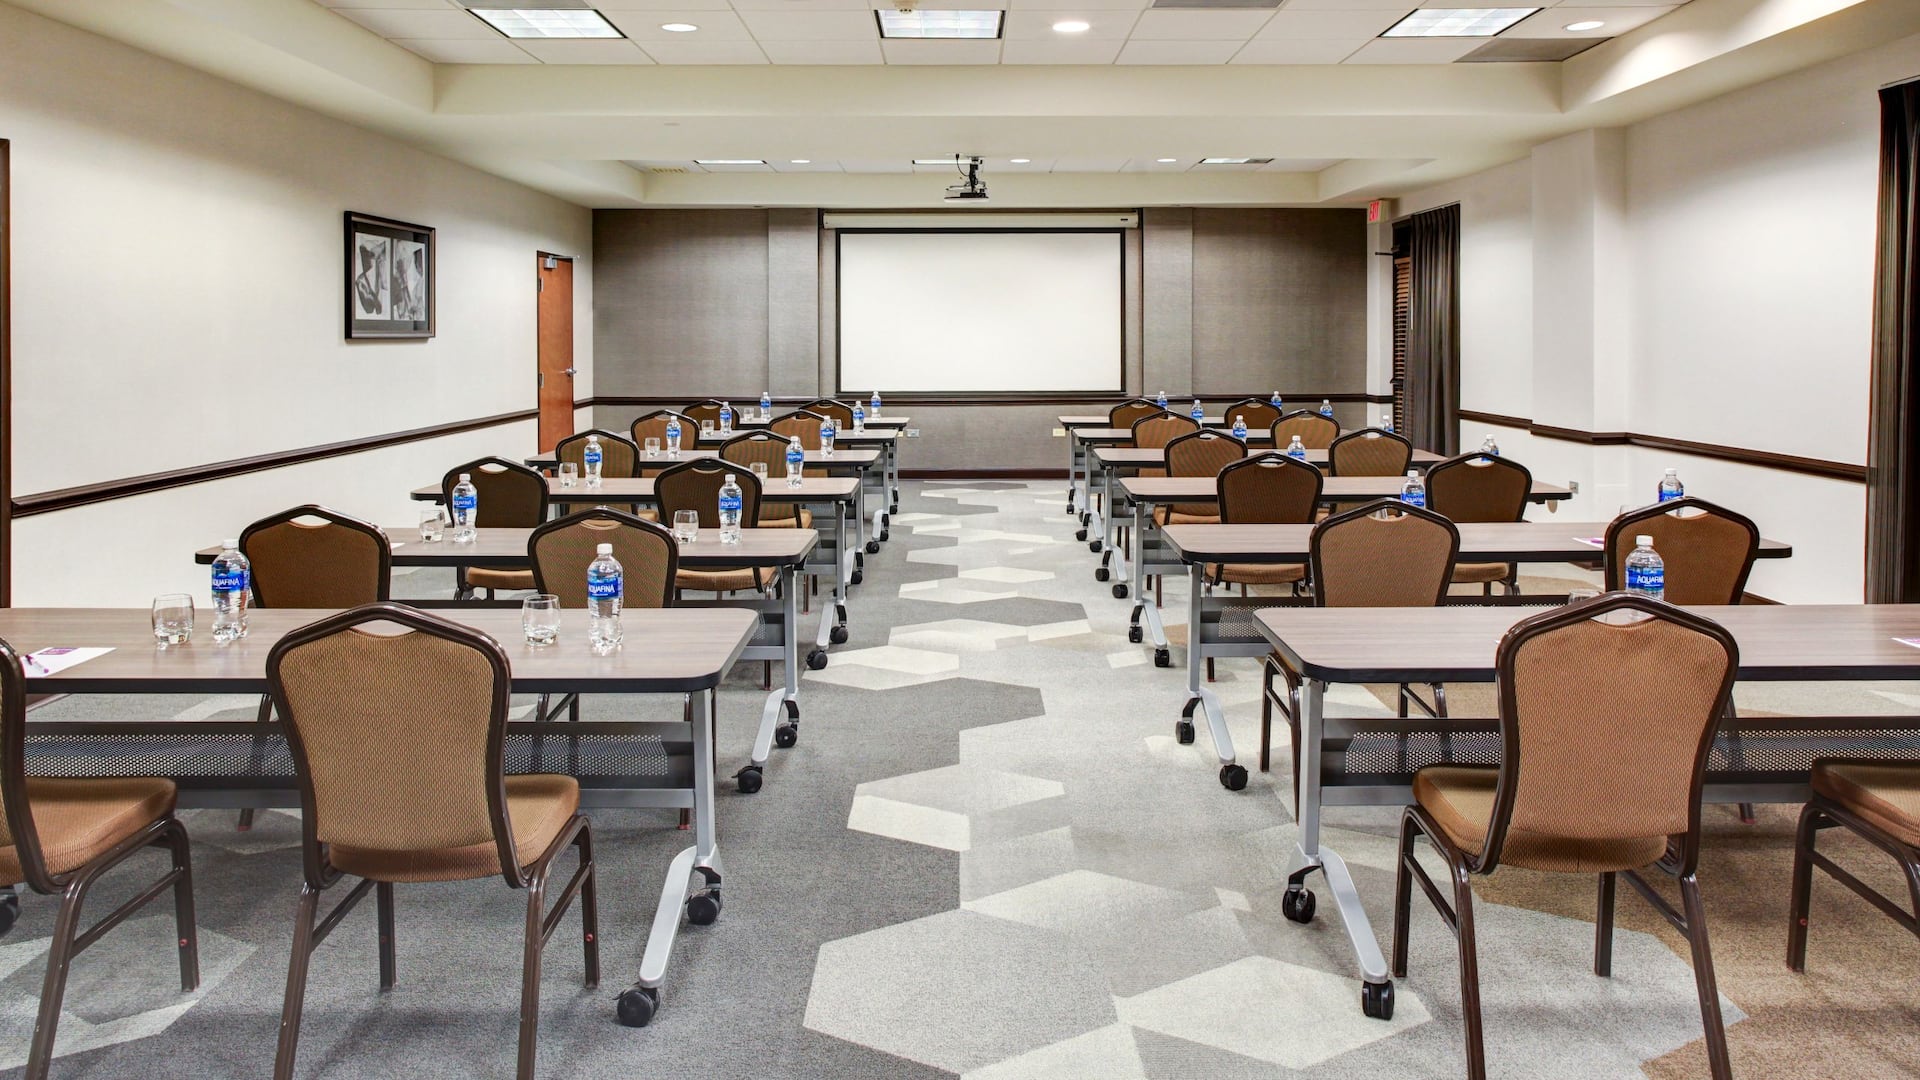 Hyatt Place Oklahoma City Airport Meeting Space with Classroom Seating Near OKC Airport